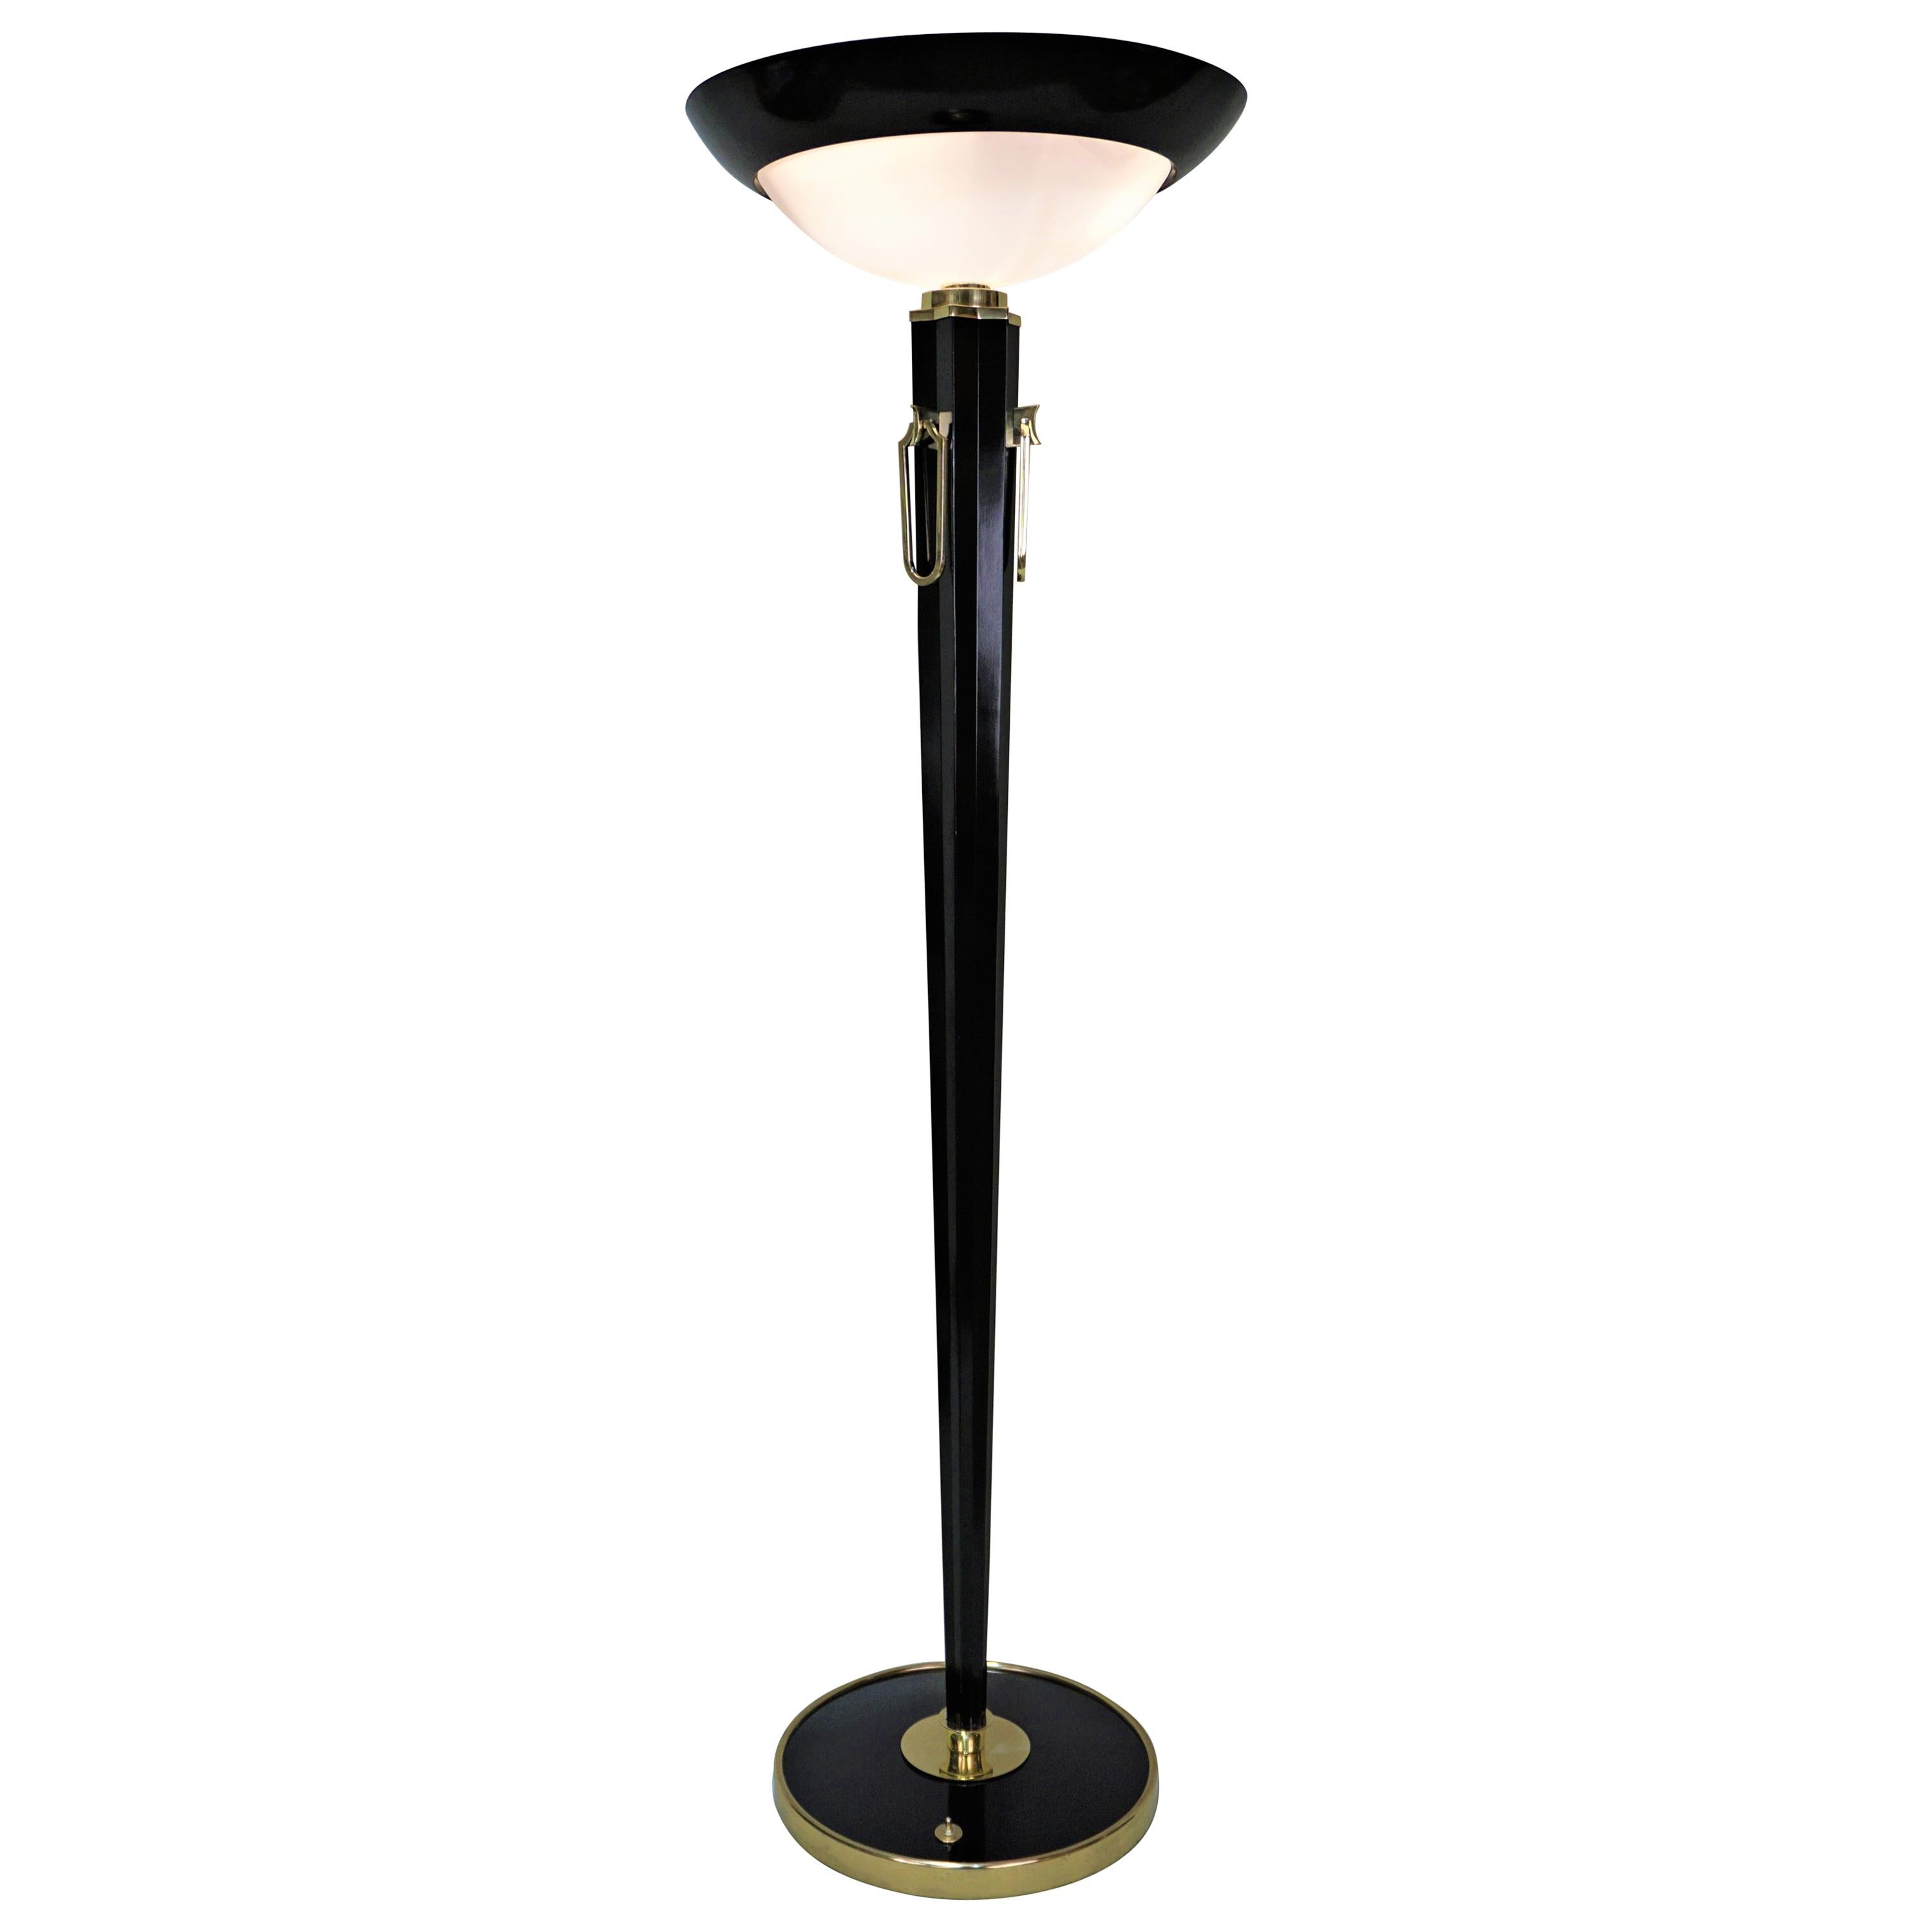 French 1930s Art Deco Torchiere Floor Lamp